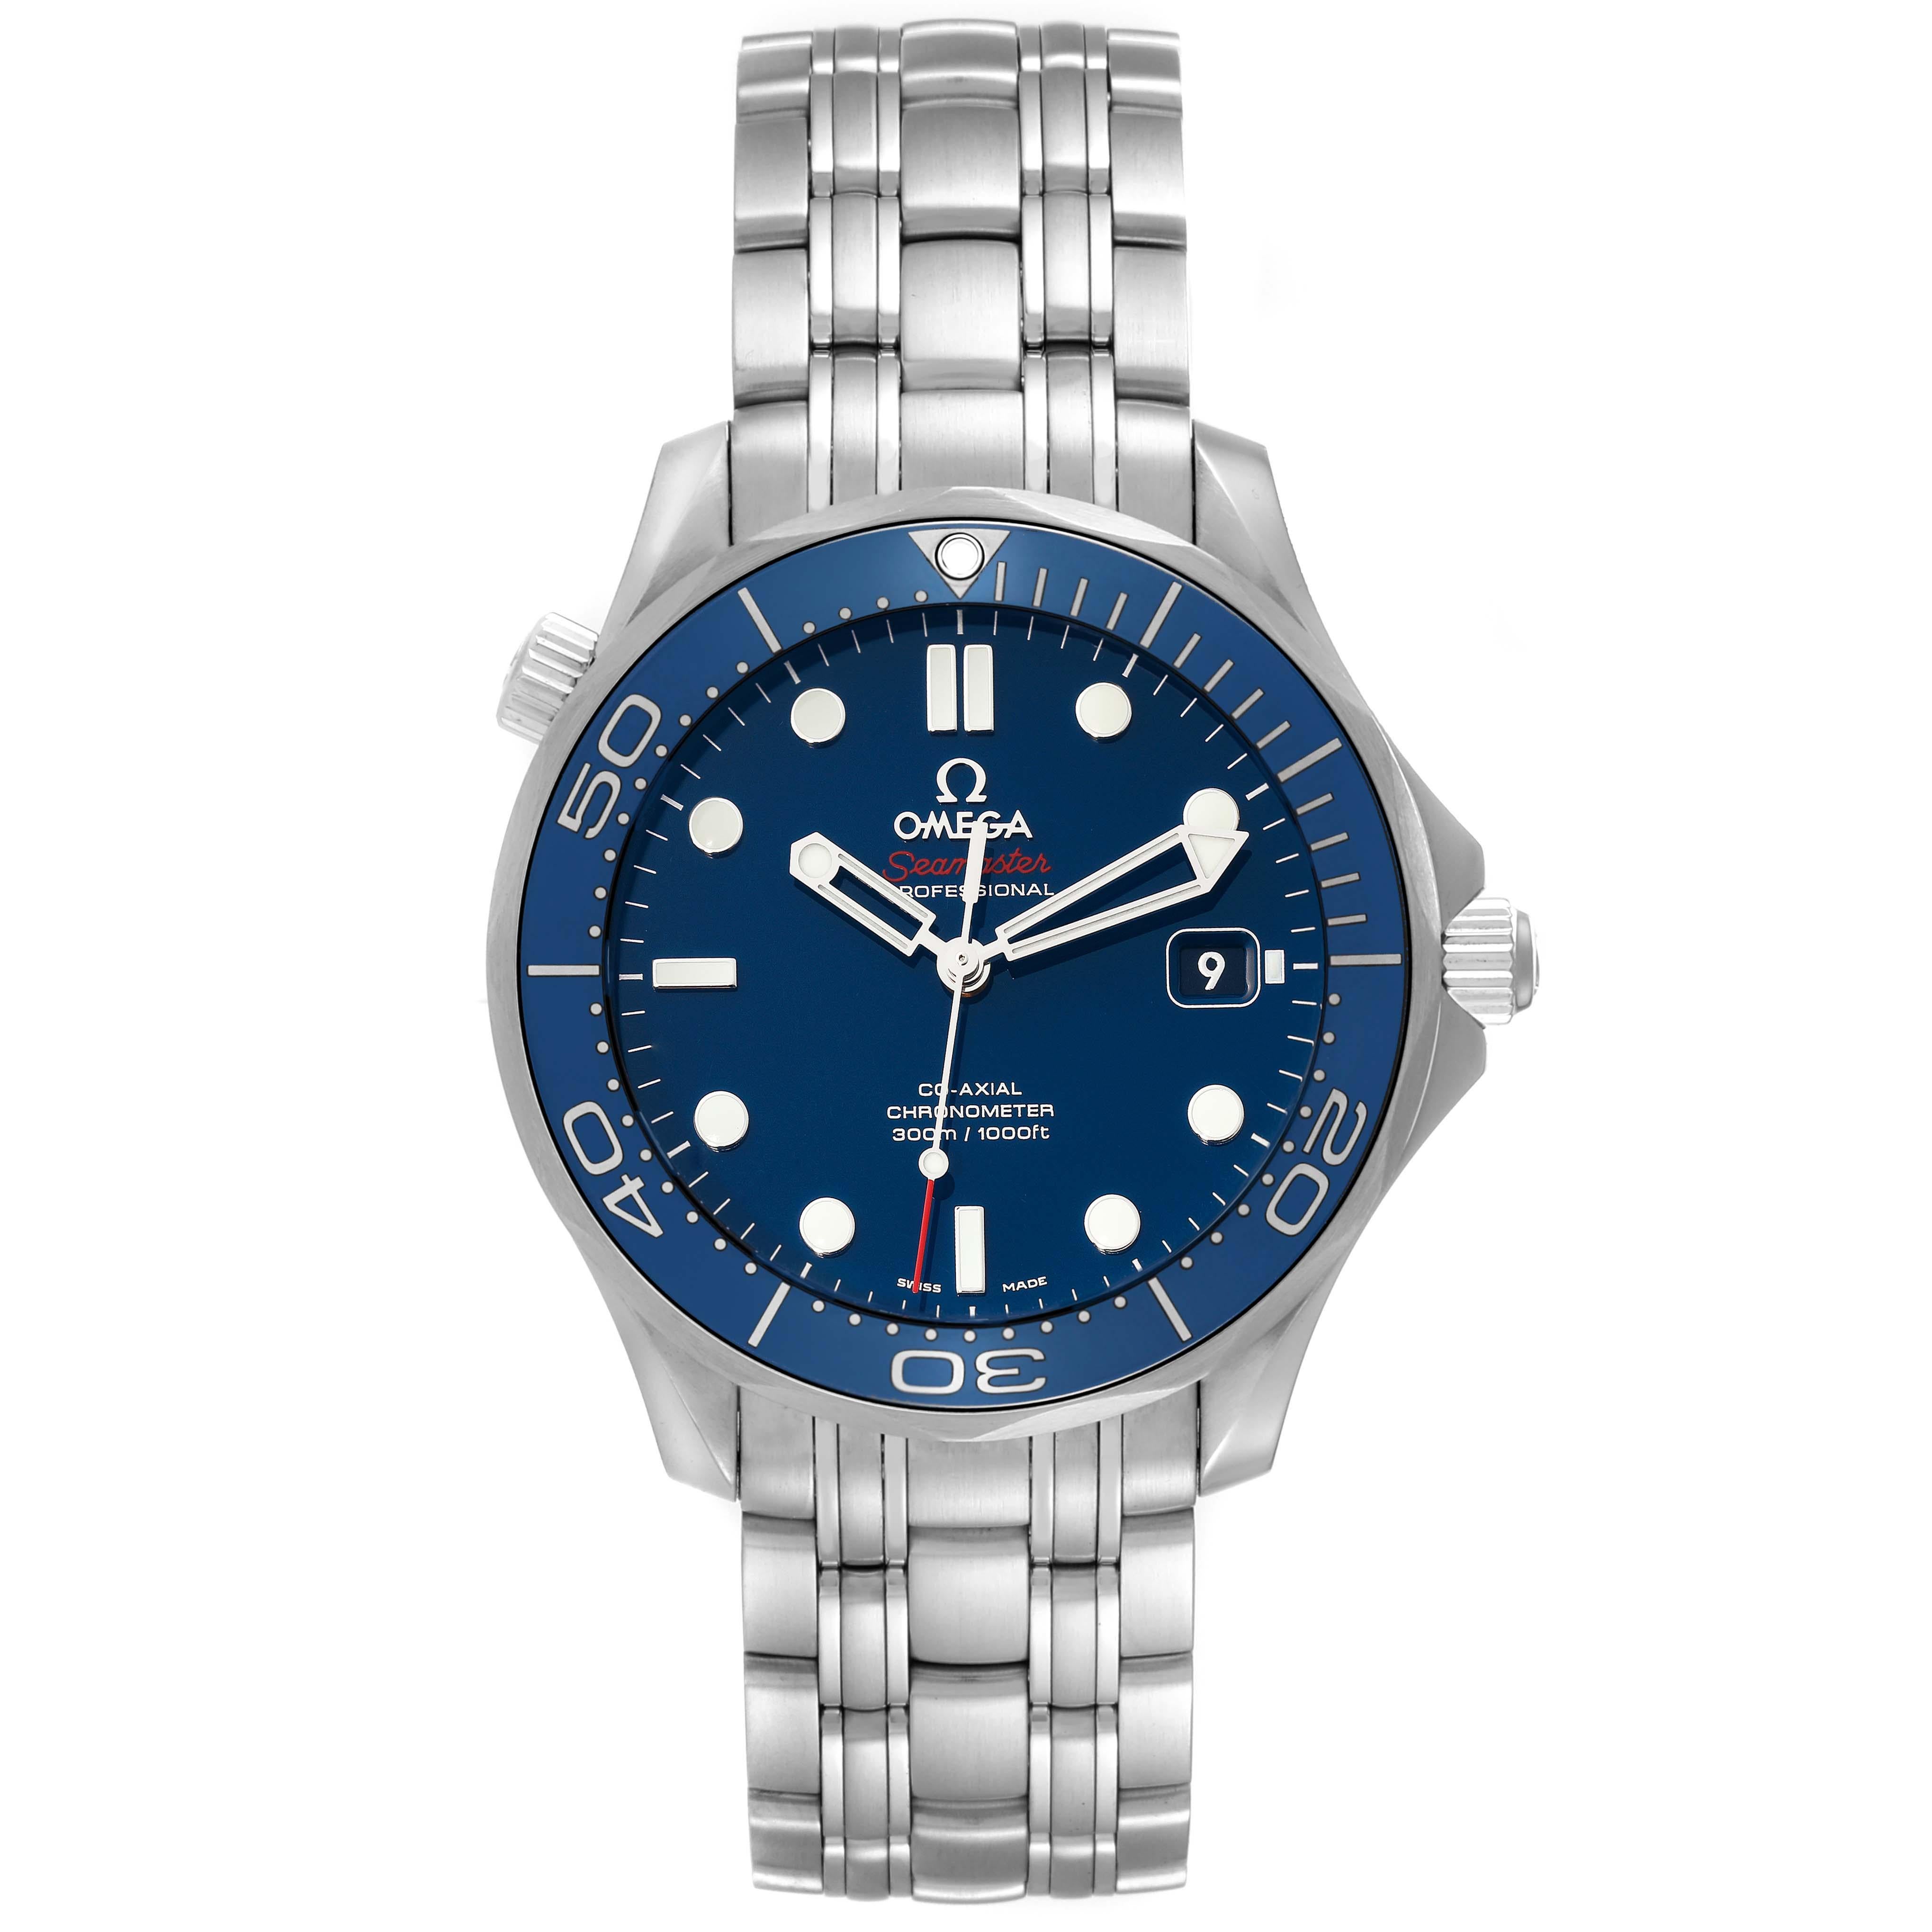 Omega Seamaster Diver 300M Co-Axial Steel Mens Watch 212.30.41.20.03.001 Card. Automatic self-winding chronometer, Co-Axial Escapement movement with rhodium-plated finish. Stainless steel case 41.0 mm in diameter. Helium escape valve at 10 o'clock.